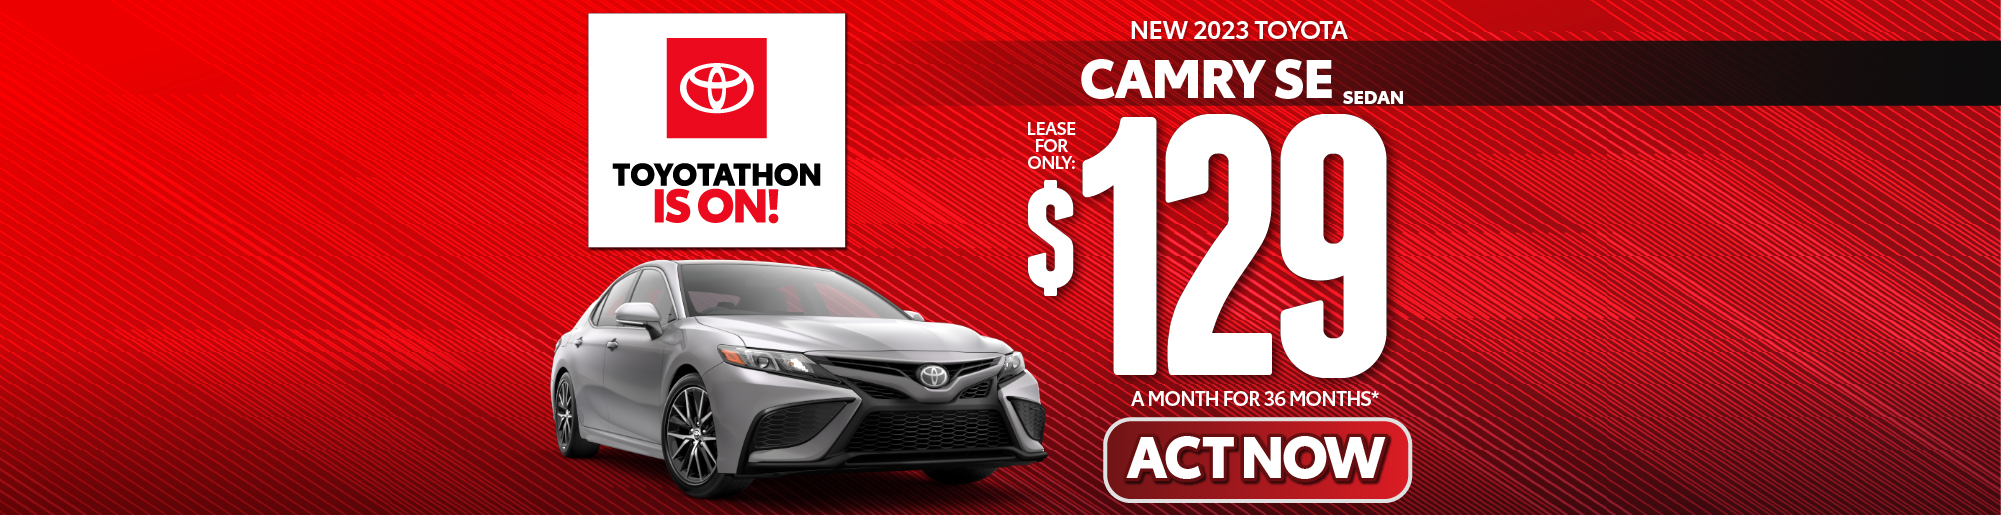 New 2023 Toyota Camry SE Sedan Lease for only $129/mo.* ACT NOW